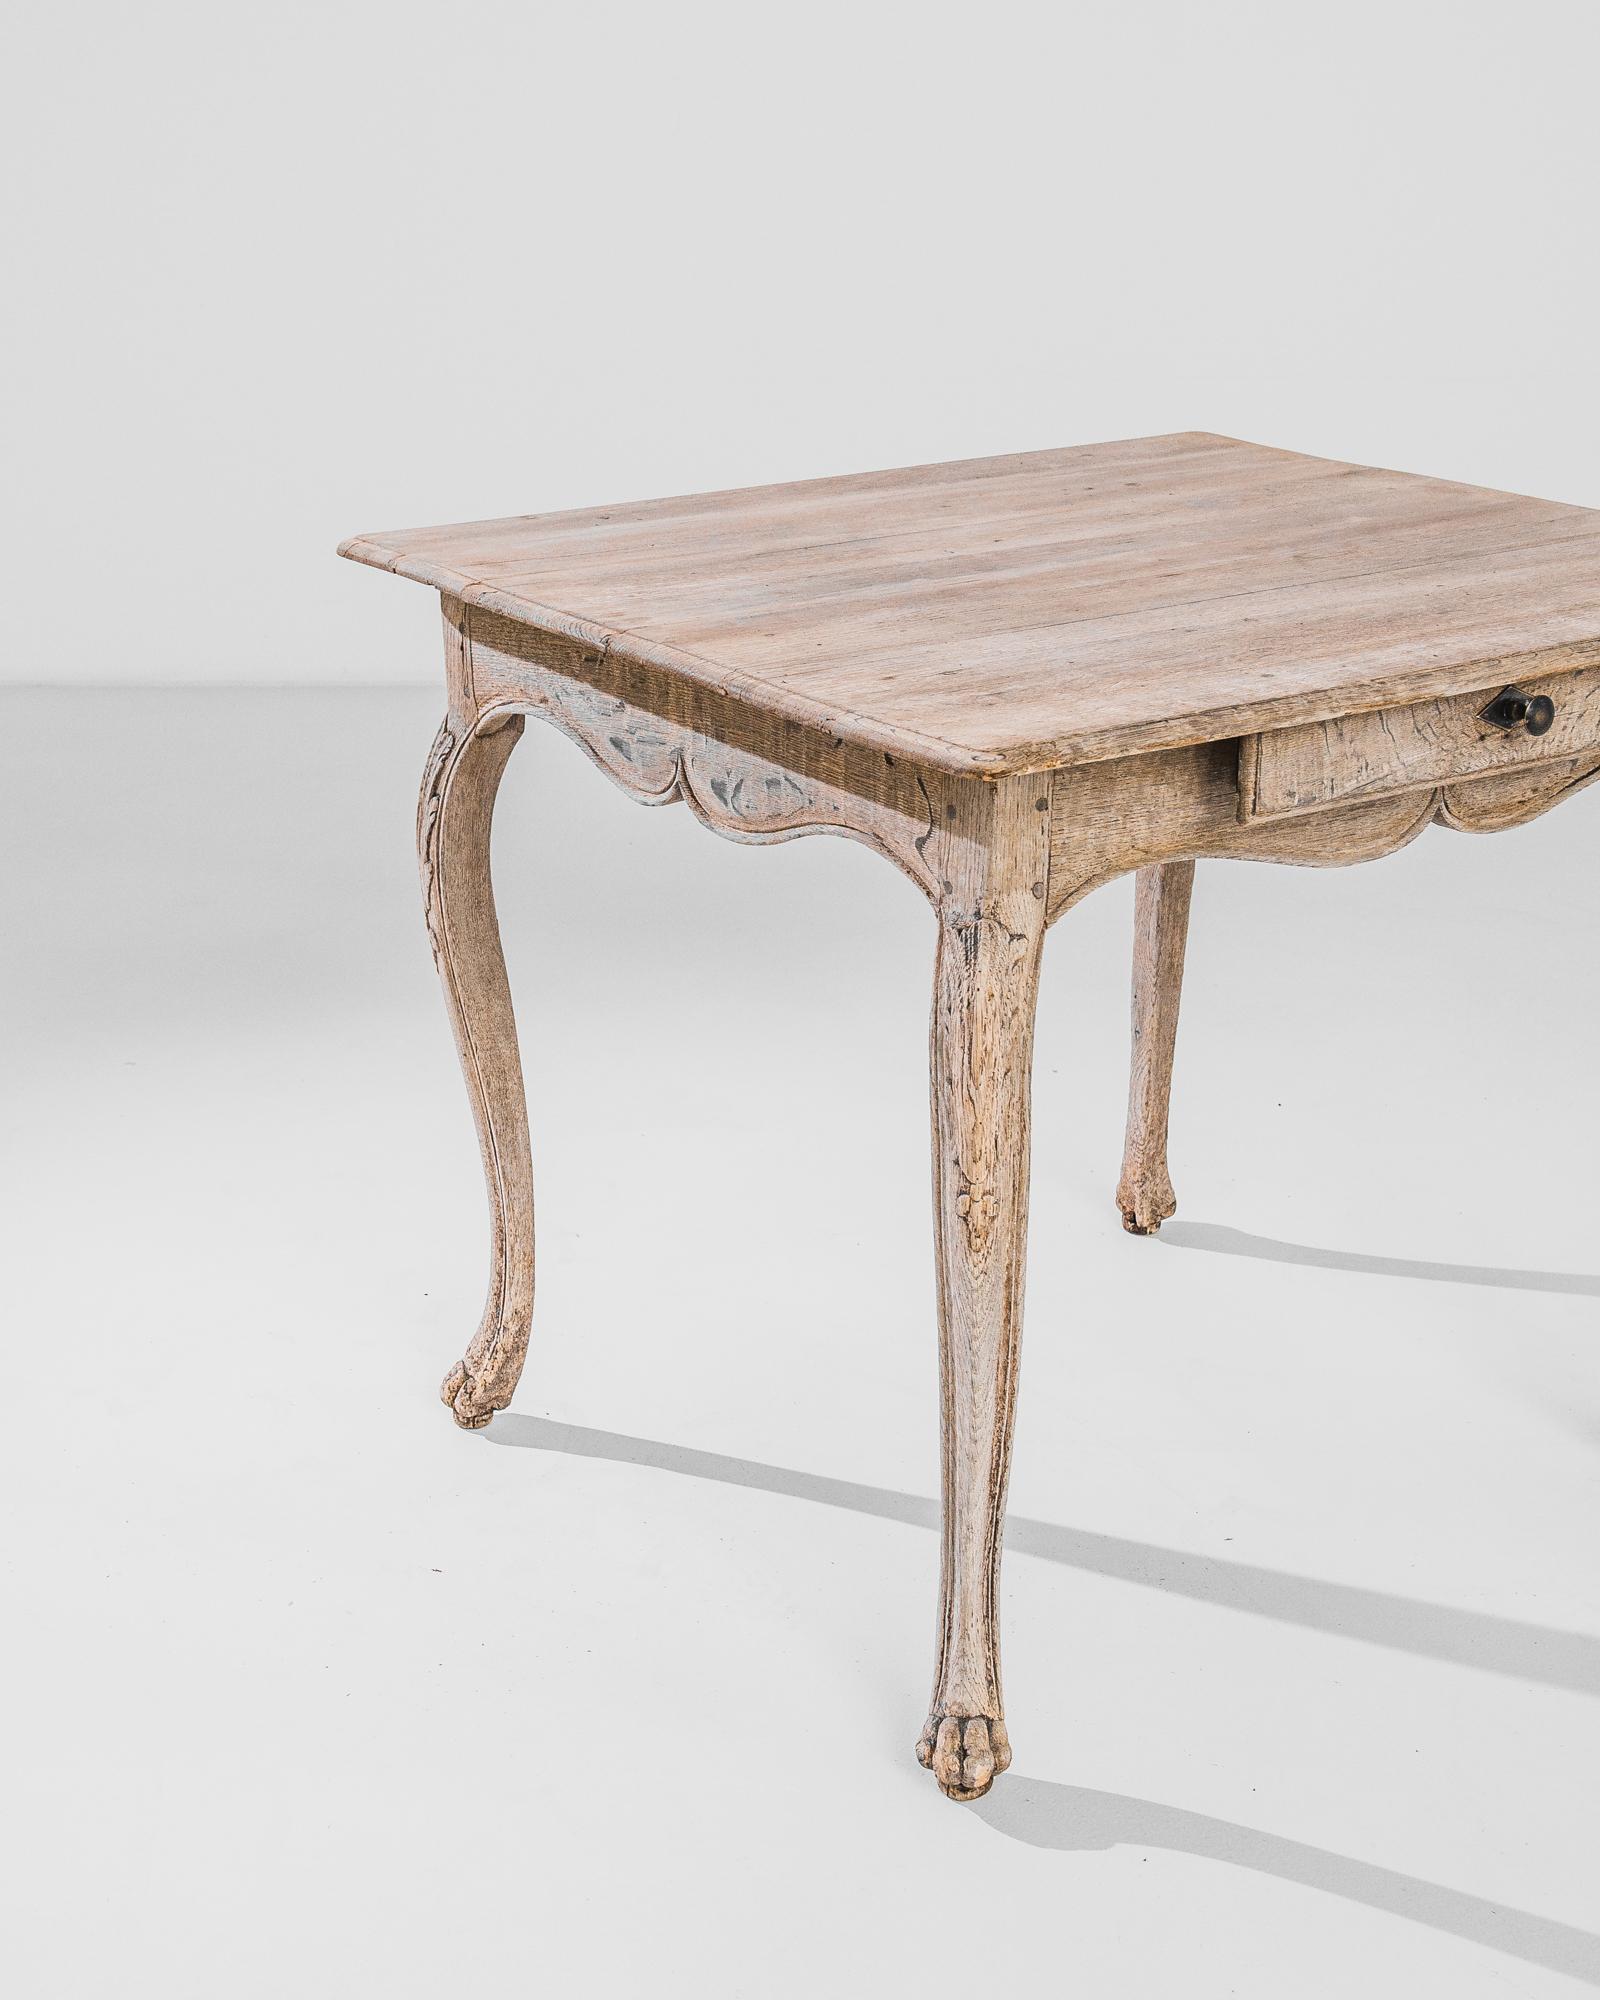 Cabriole legs, ending in carved claw feet, give this oak occasional table an elegant stance. Made in France in the 1880s, the wood has been restored to an organic finish, revealing the soft russet tone of the natural oak. A scalloped apron houses a